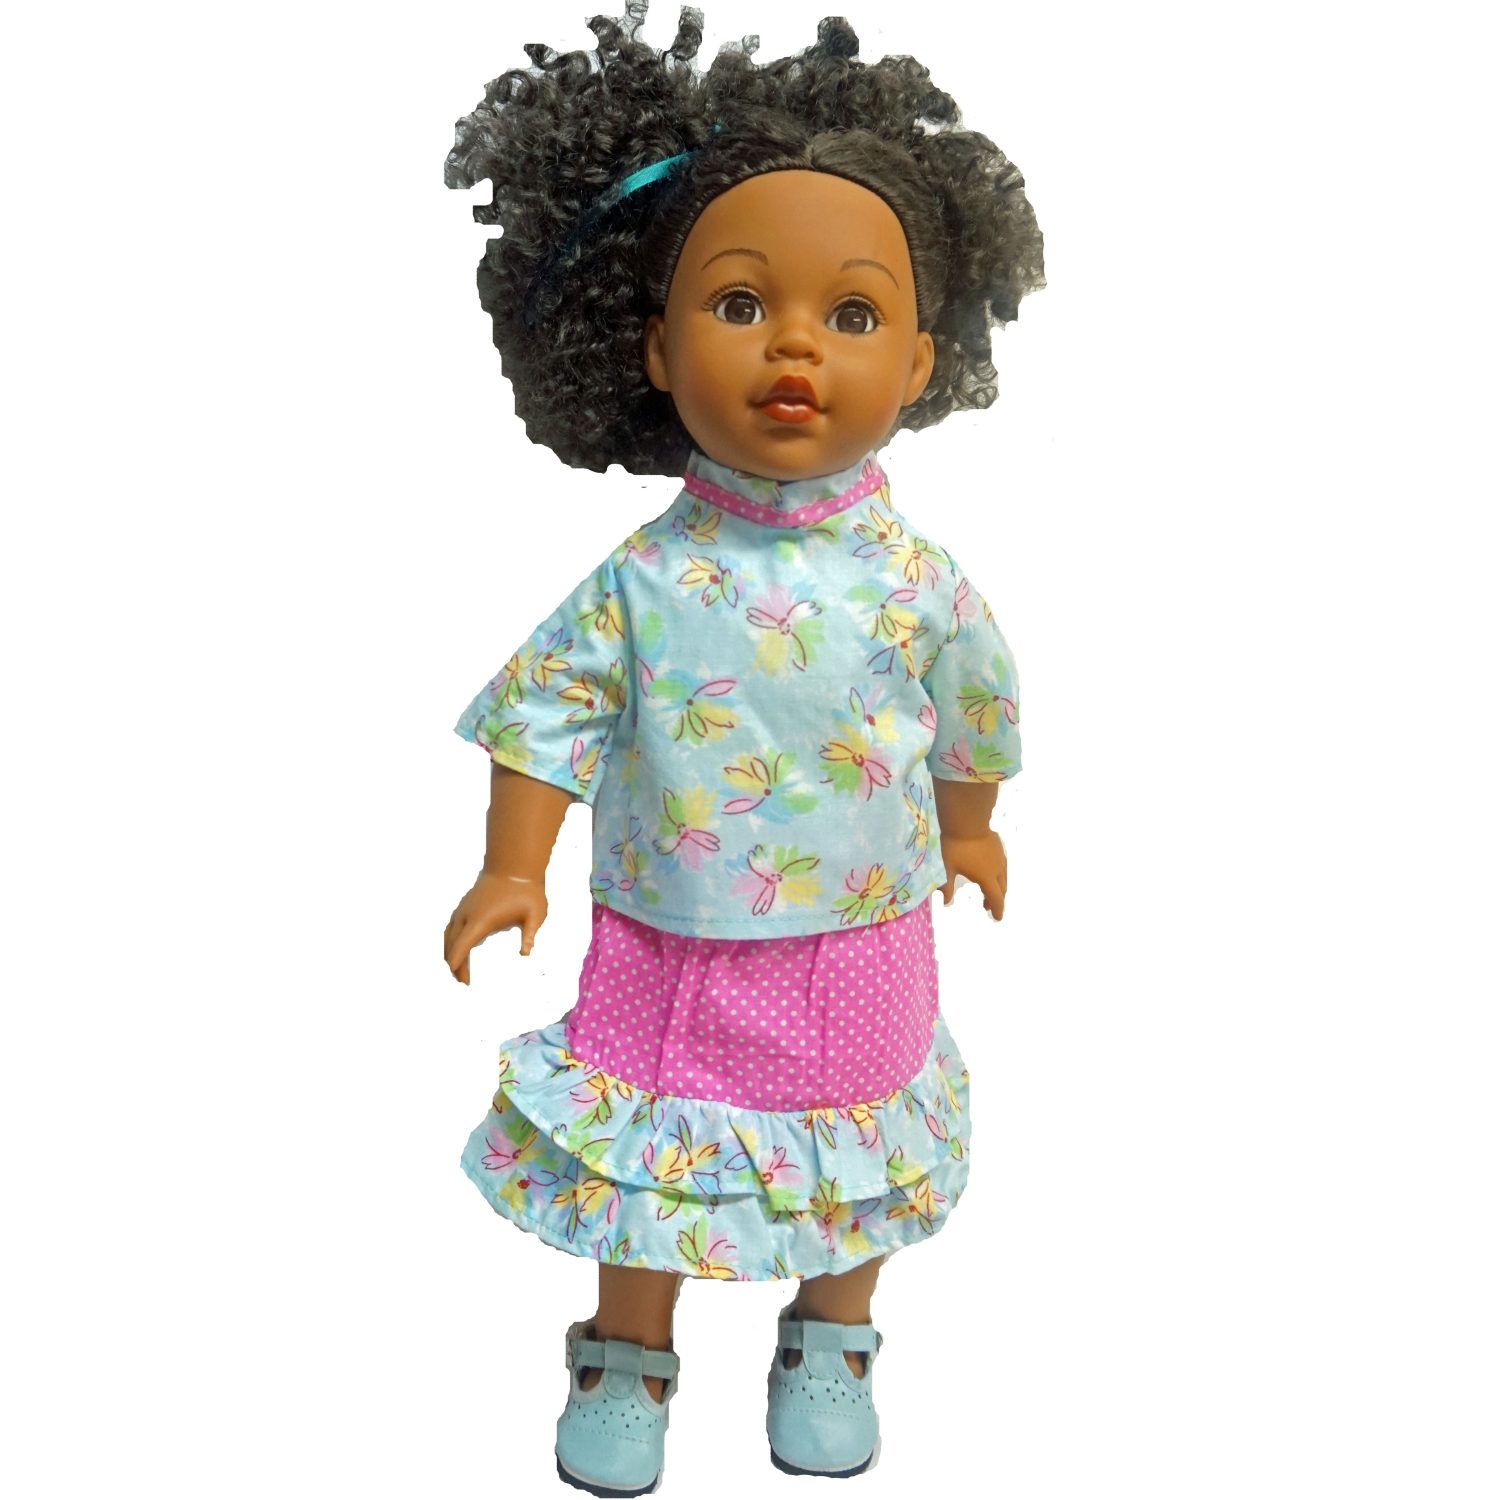 Doll Clothes Superstore Floral tunic and Ruffle Skirt For 18 Inch Dolls Like American Girl Our Generation My Life Dolls